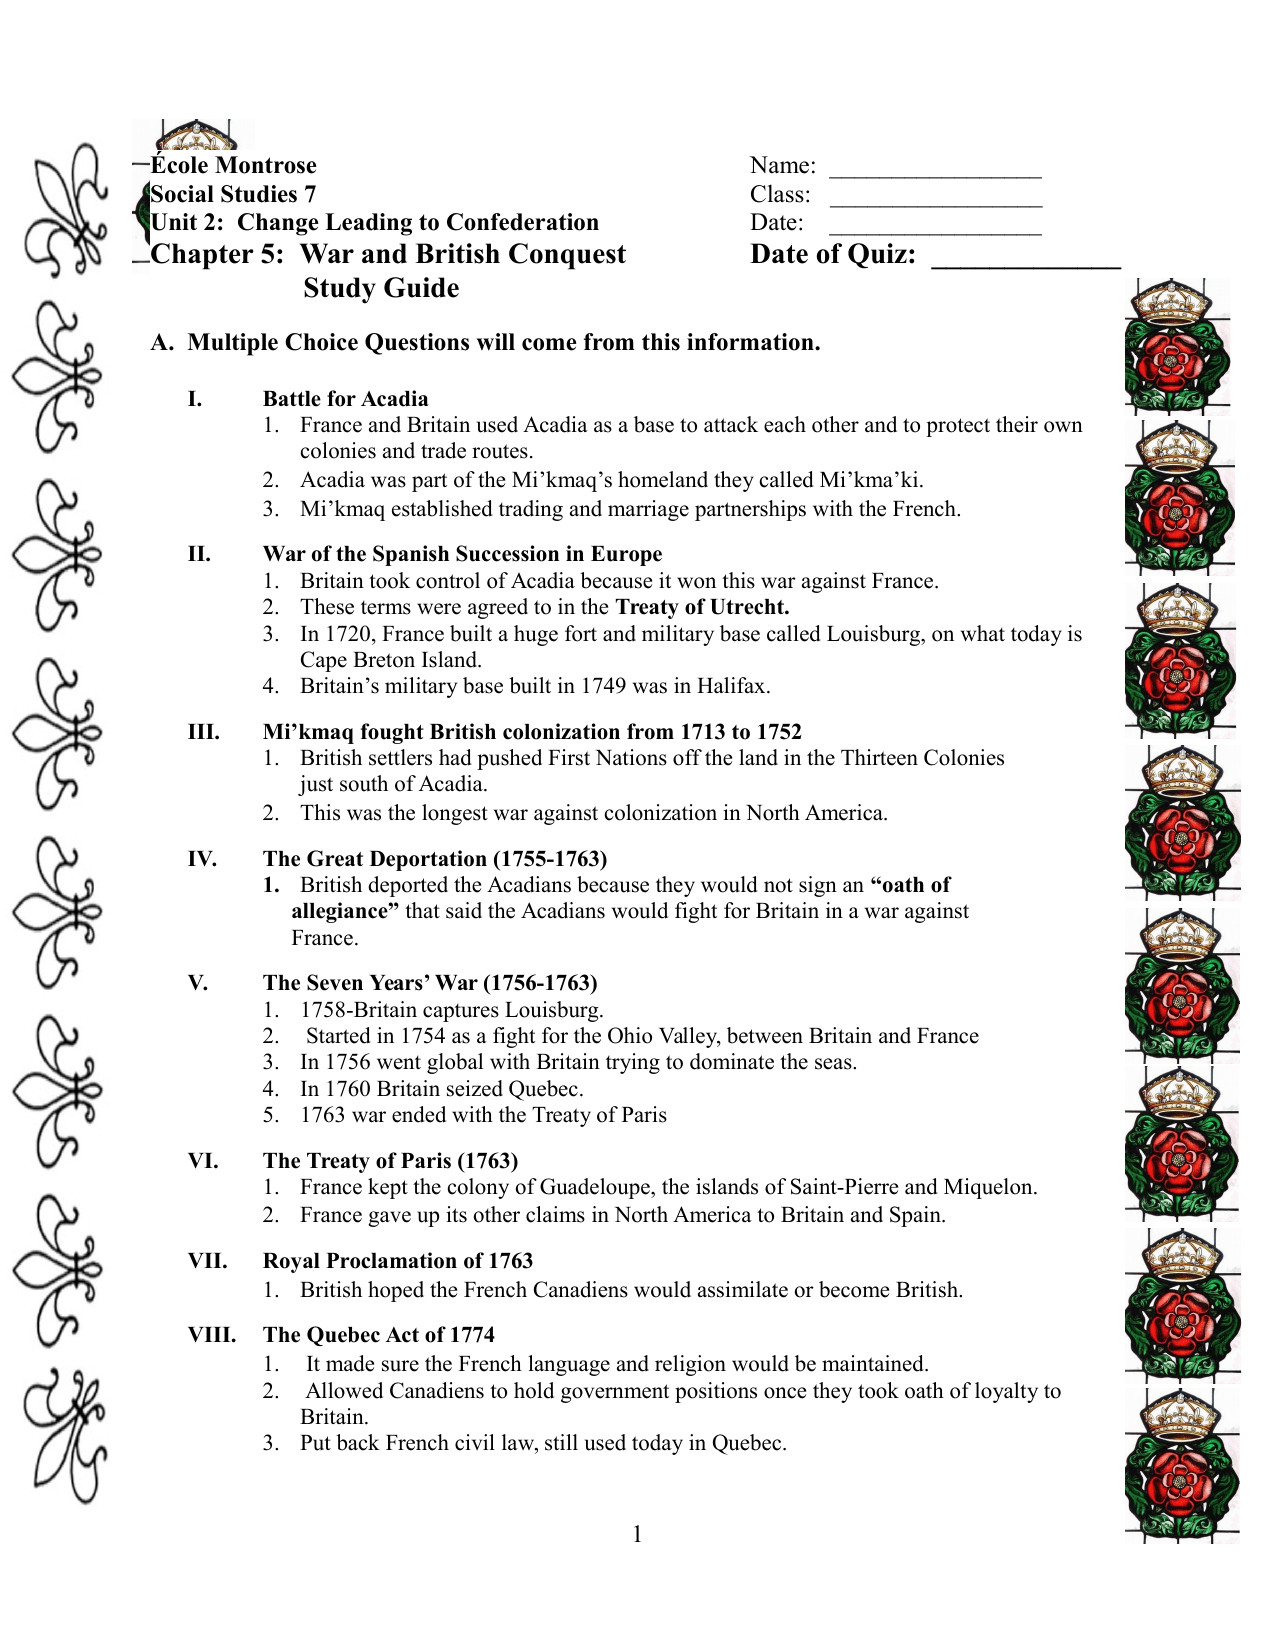 Free Math Worksheets Second Grade 2 Counting Money Counting Money Canadian Nickels Dimes Quarters